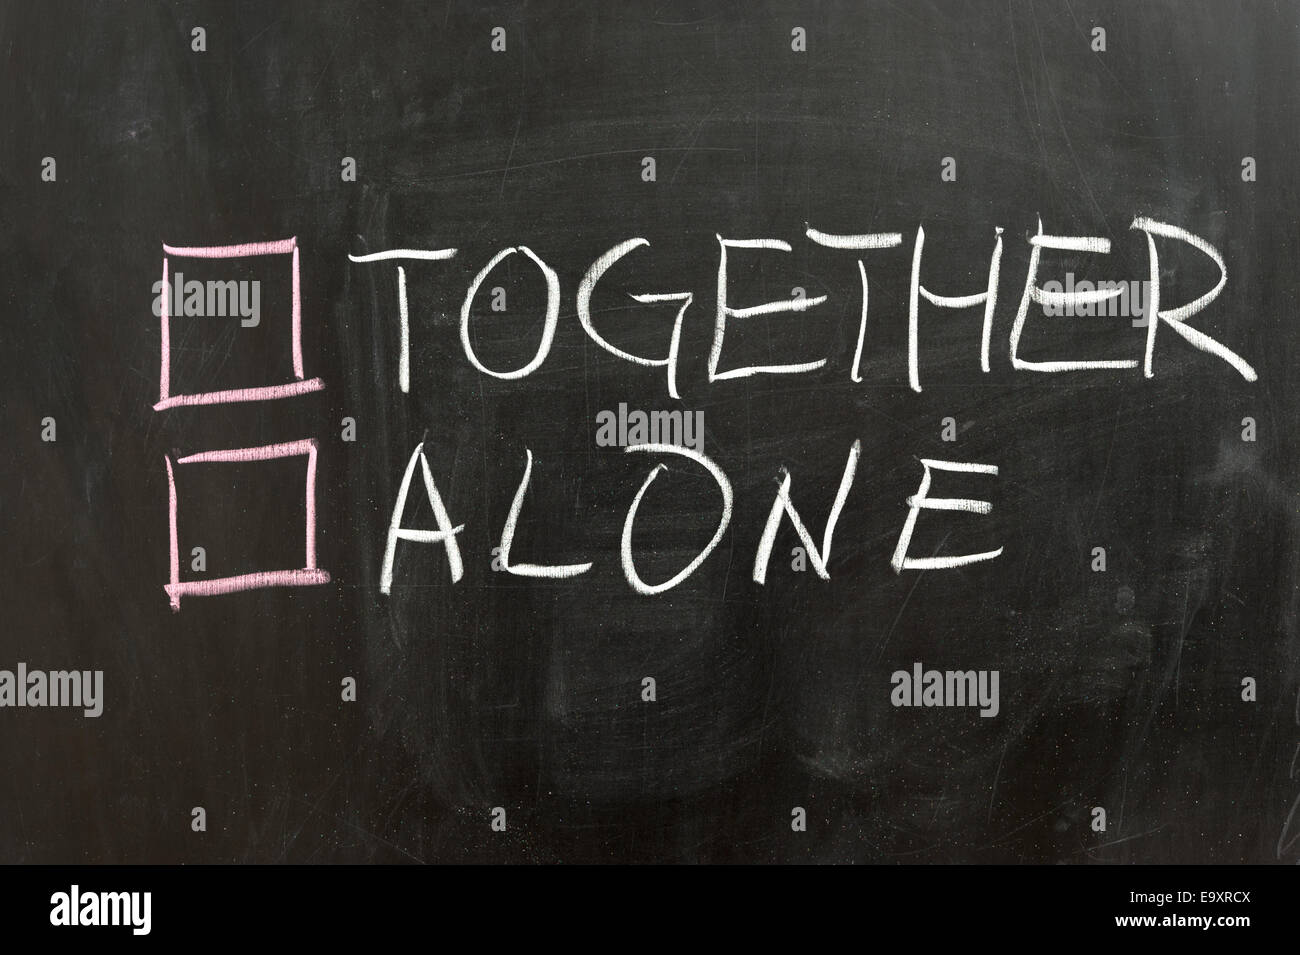 Together or alone options on the chalkboard Stock Photo